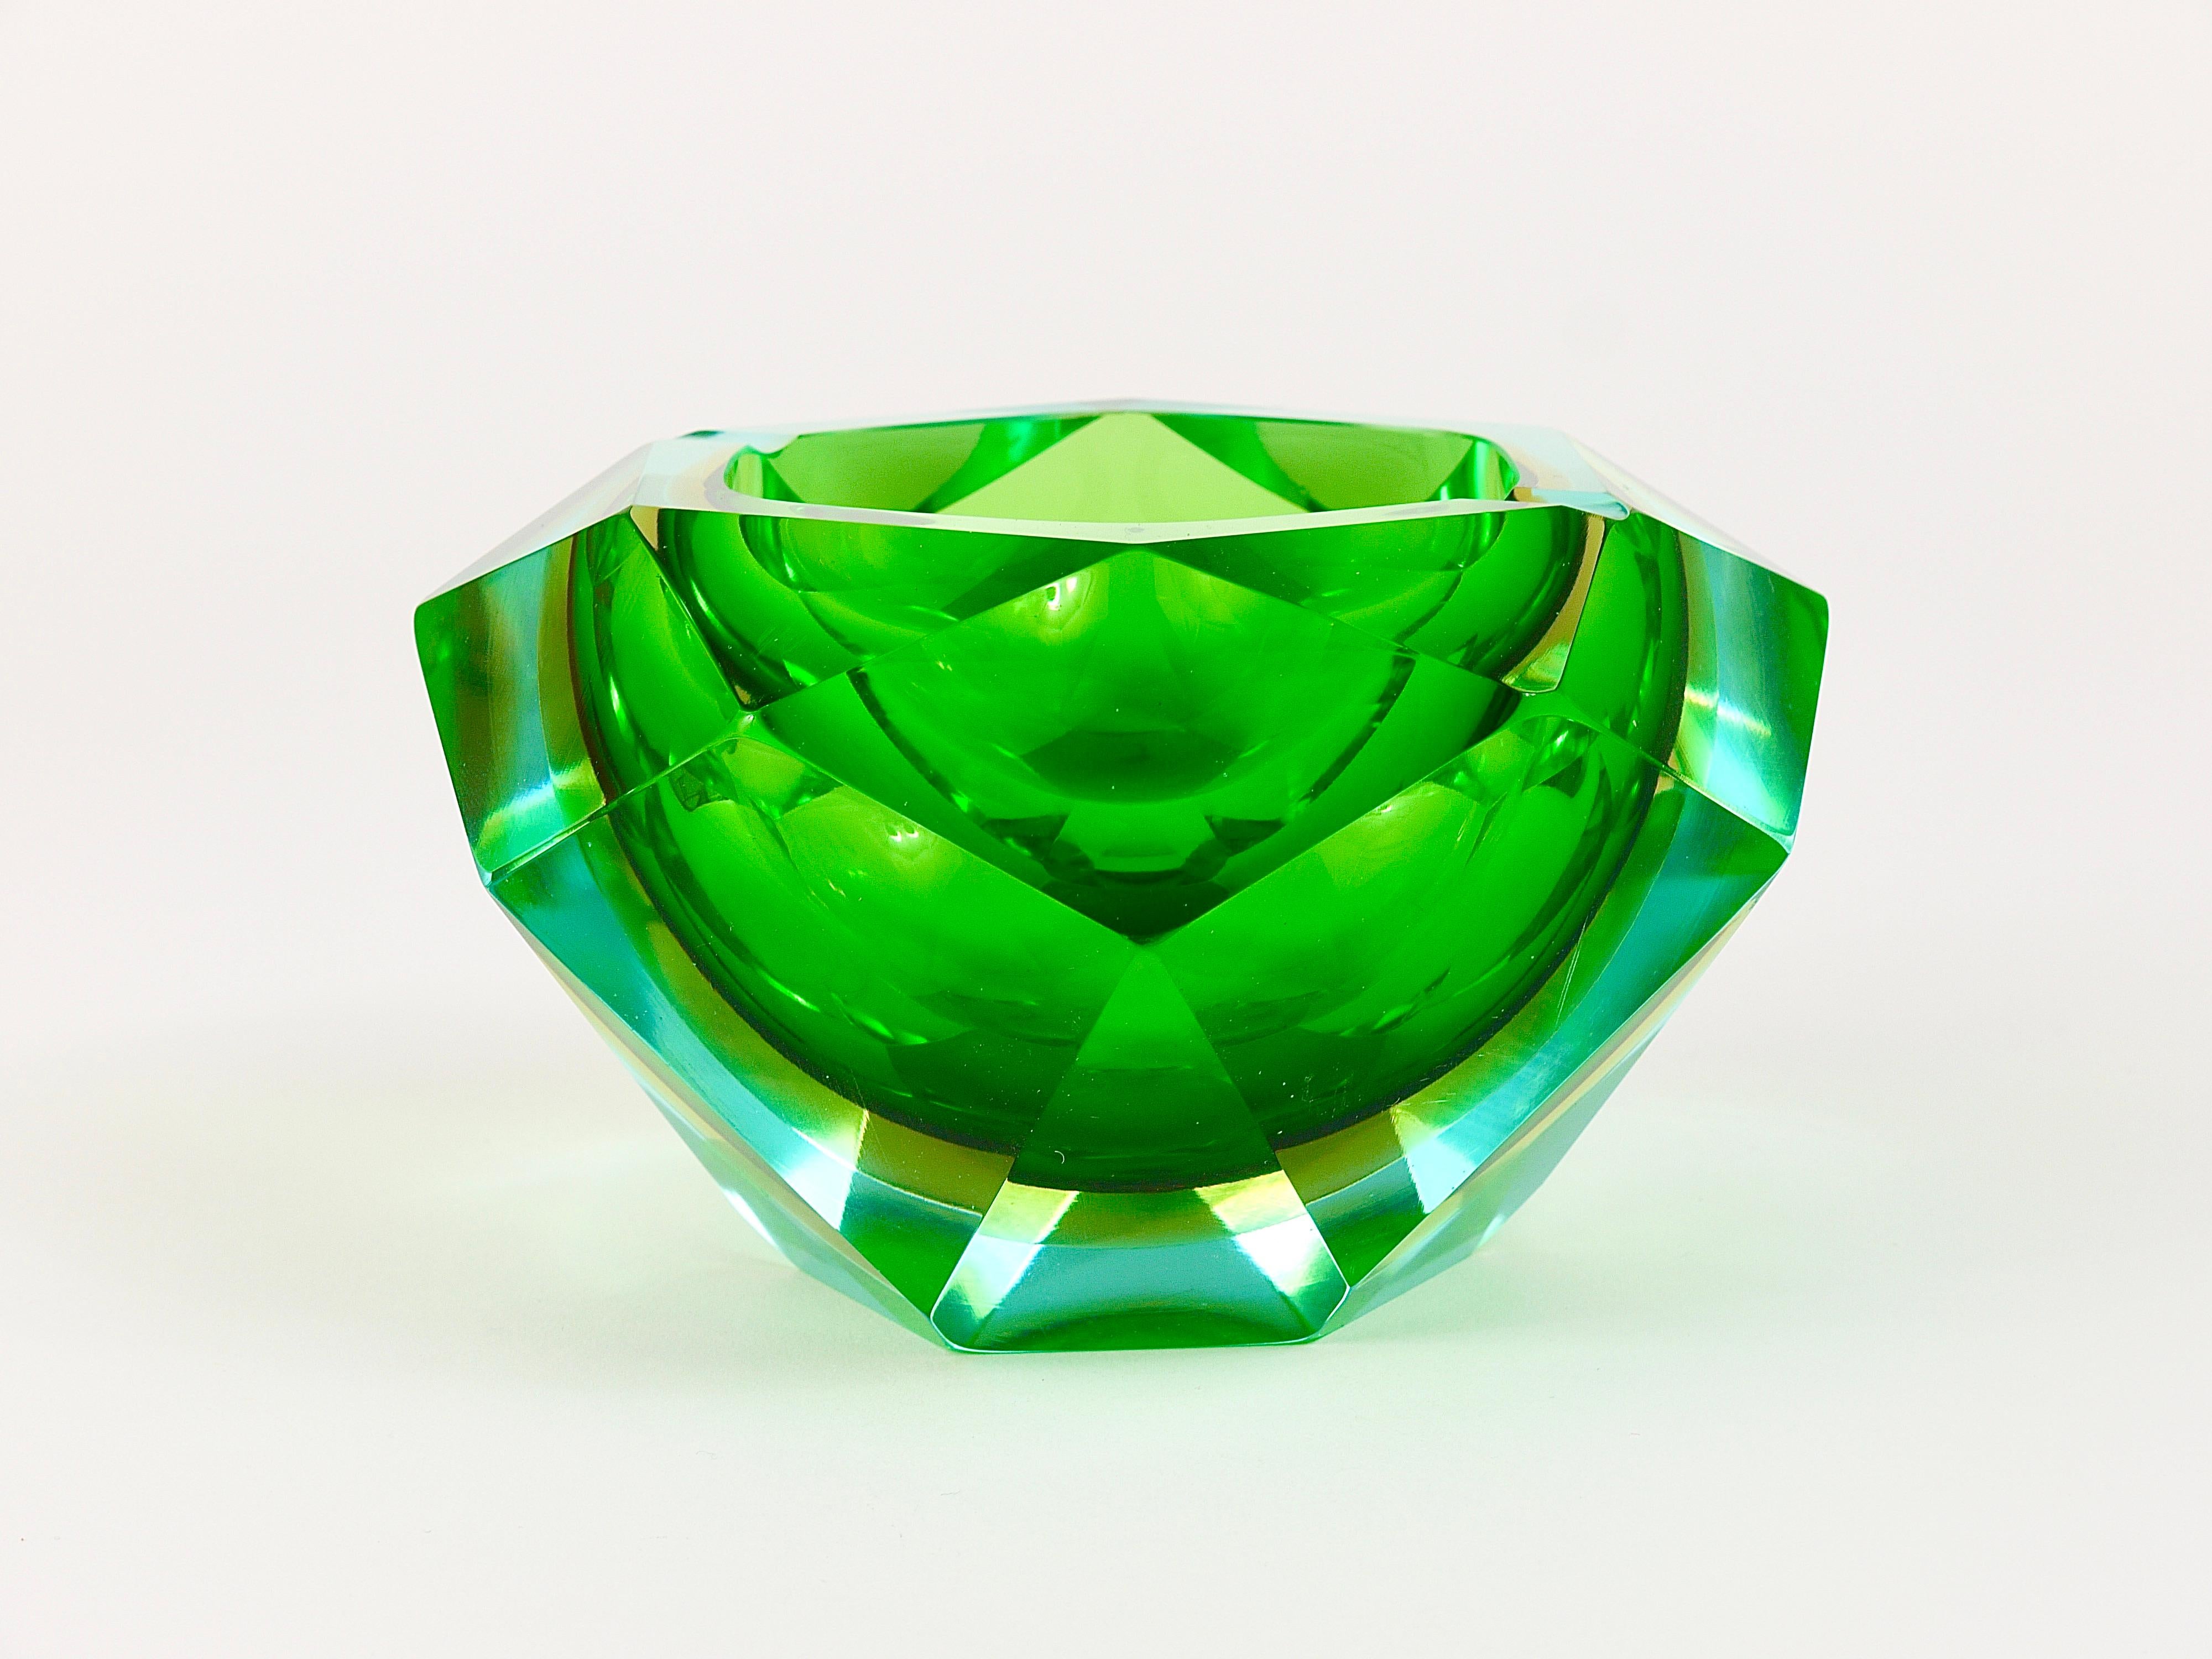 A beautiful multi-faceted and polished Murano glass ashtray in a wonderful diamond shape from the 1960s. Designed by Flavio Poli for Seguso Vetri d'Arte, Italy. A colorful combination of light-blue, yellow and green layered art glass. In very good